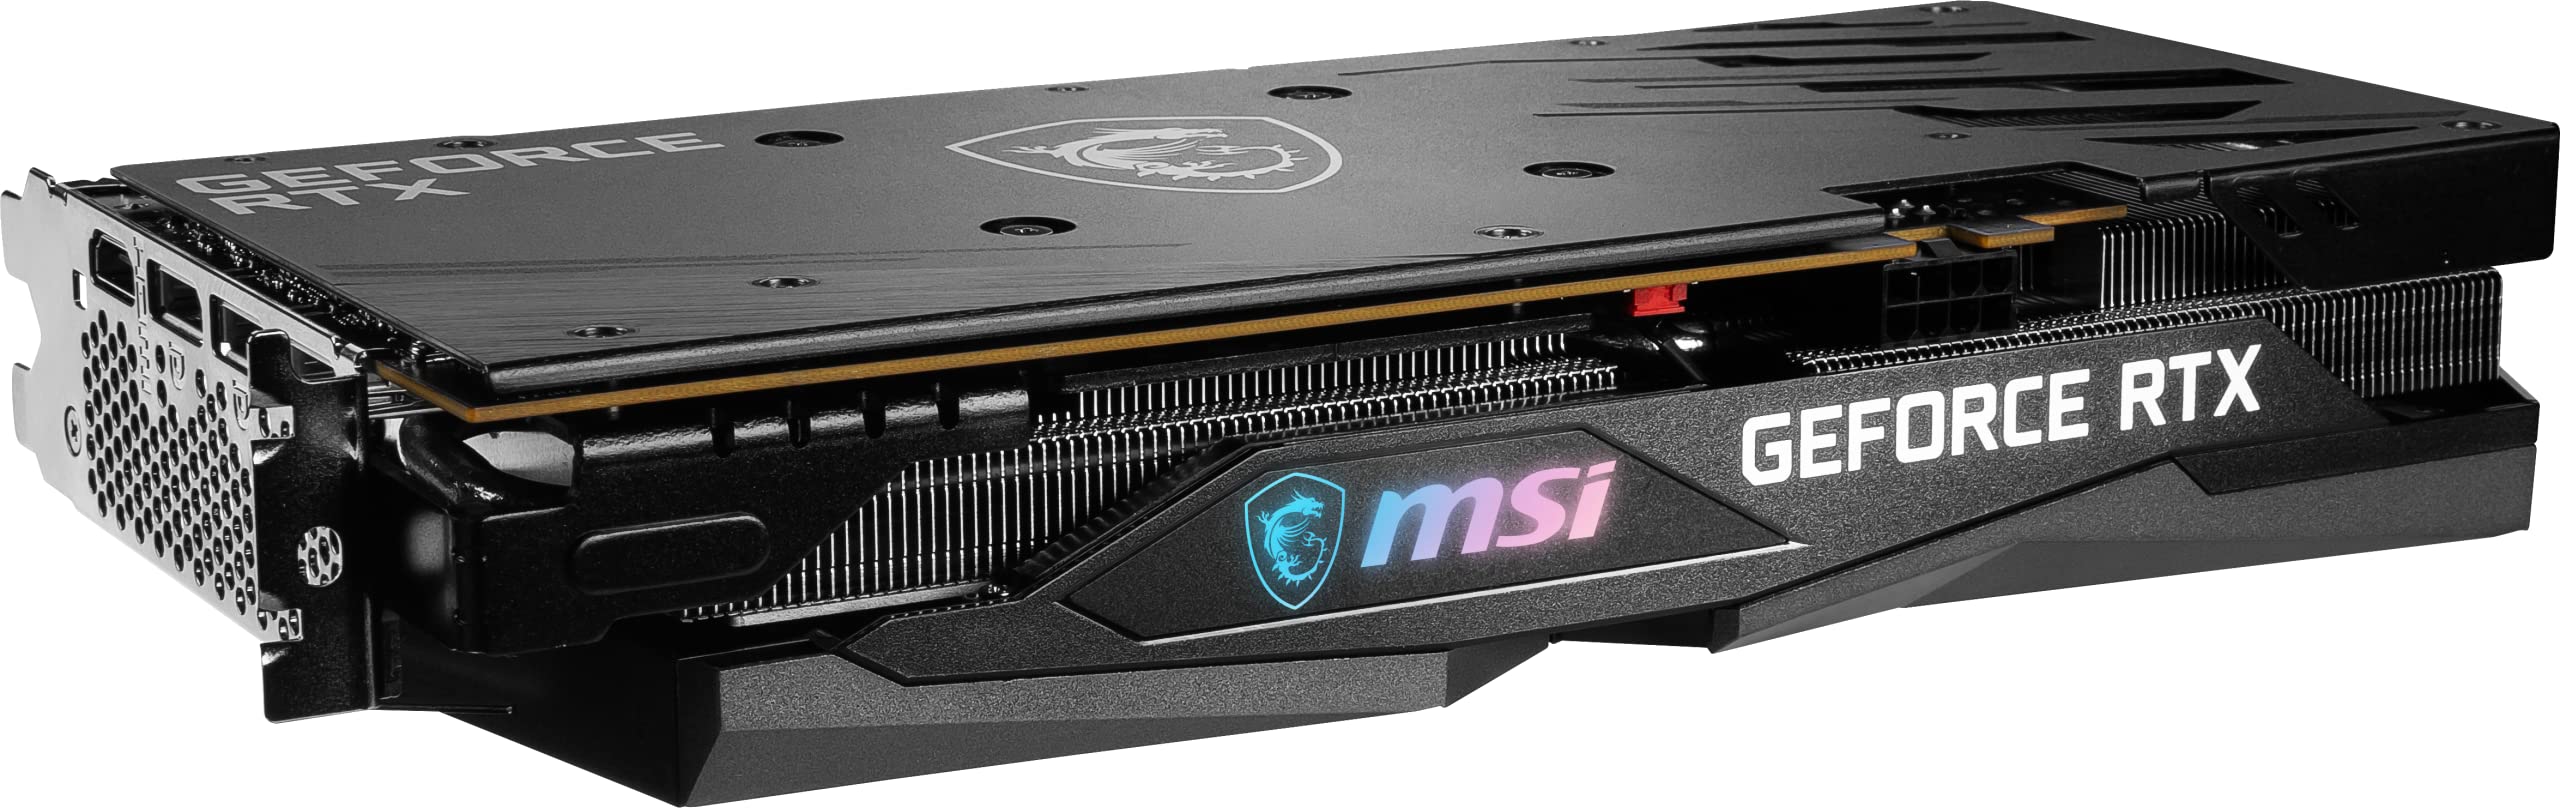 MSI GeForce RTX 3050 GAMING X 8G Gaming Graphics Card - 8GB GDDR6X, 1845 MHz, PCI Express Gen 4 x 8, 128-bit, 3x DP v 1.4a, HDMI 2.1 (Supports 4K)